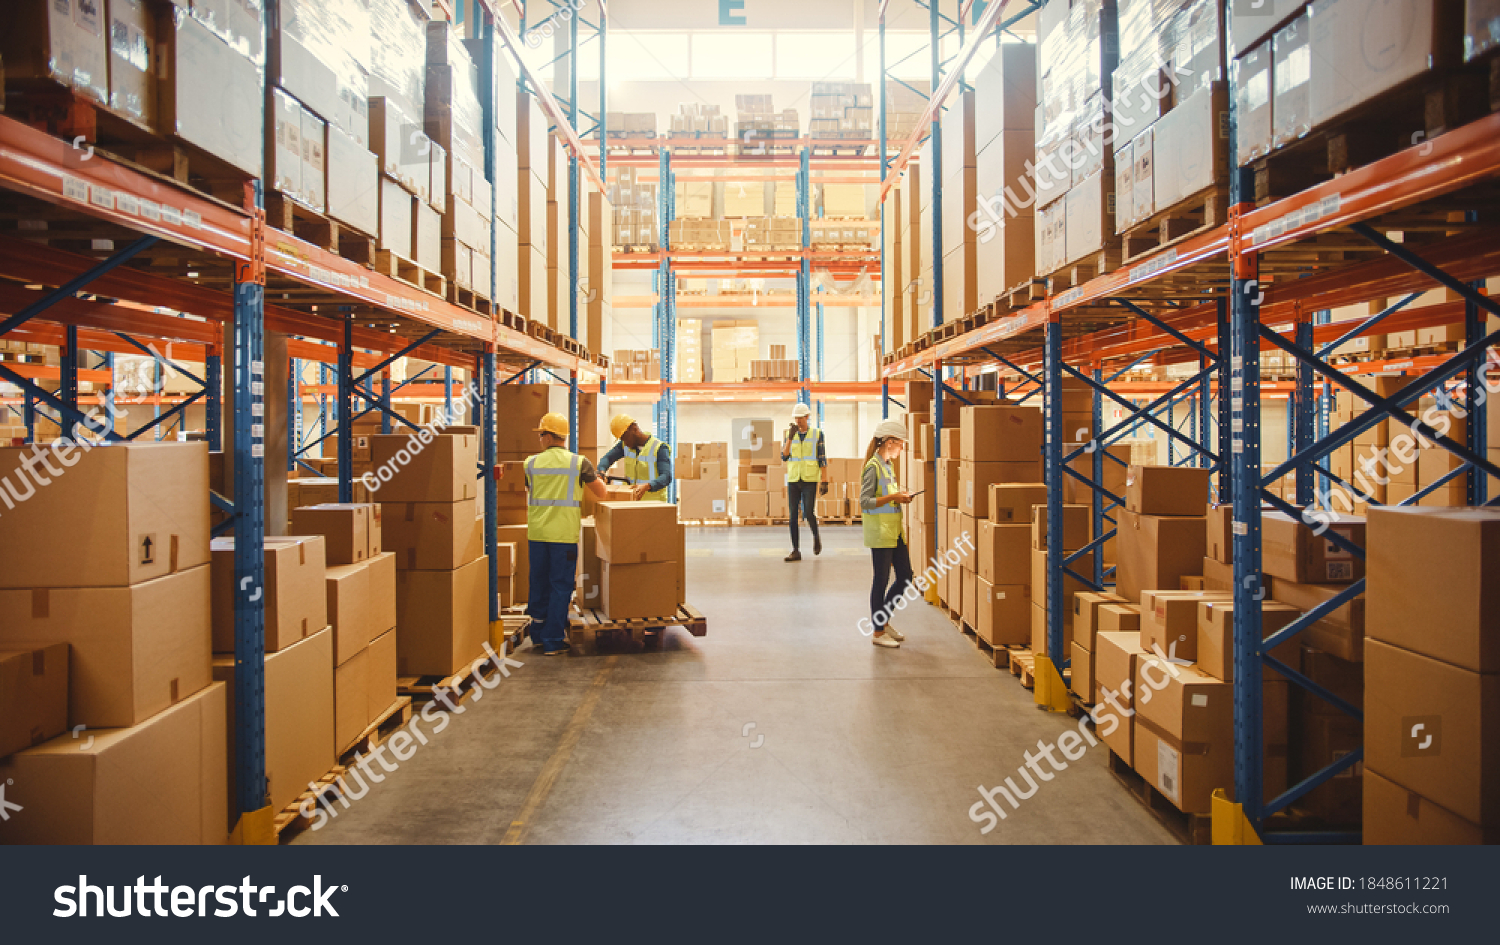 Retail Warehouse full of Shelves with Goods in Cardboard Boxes, Workers Scan and Sort Packages, Move Inventory with Pallet Trucks and Forklifts. Product Distribution Delivery Center. #1848611221